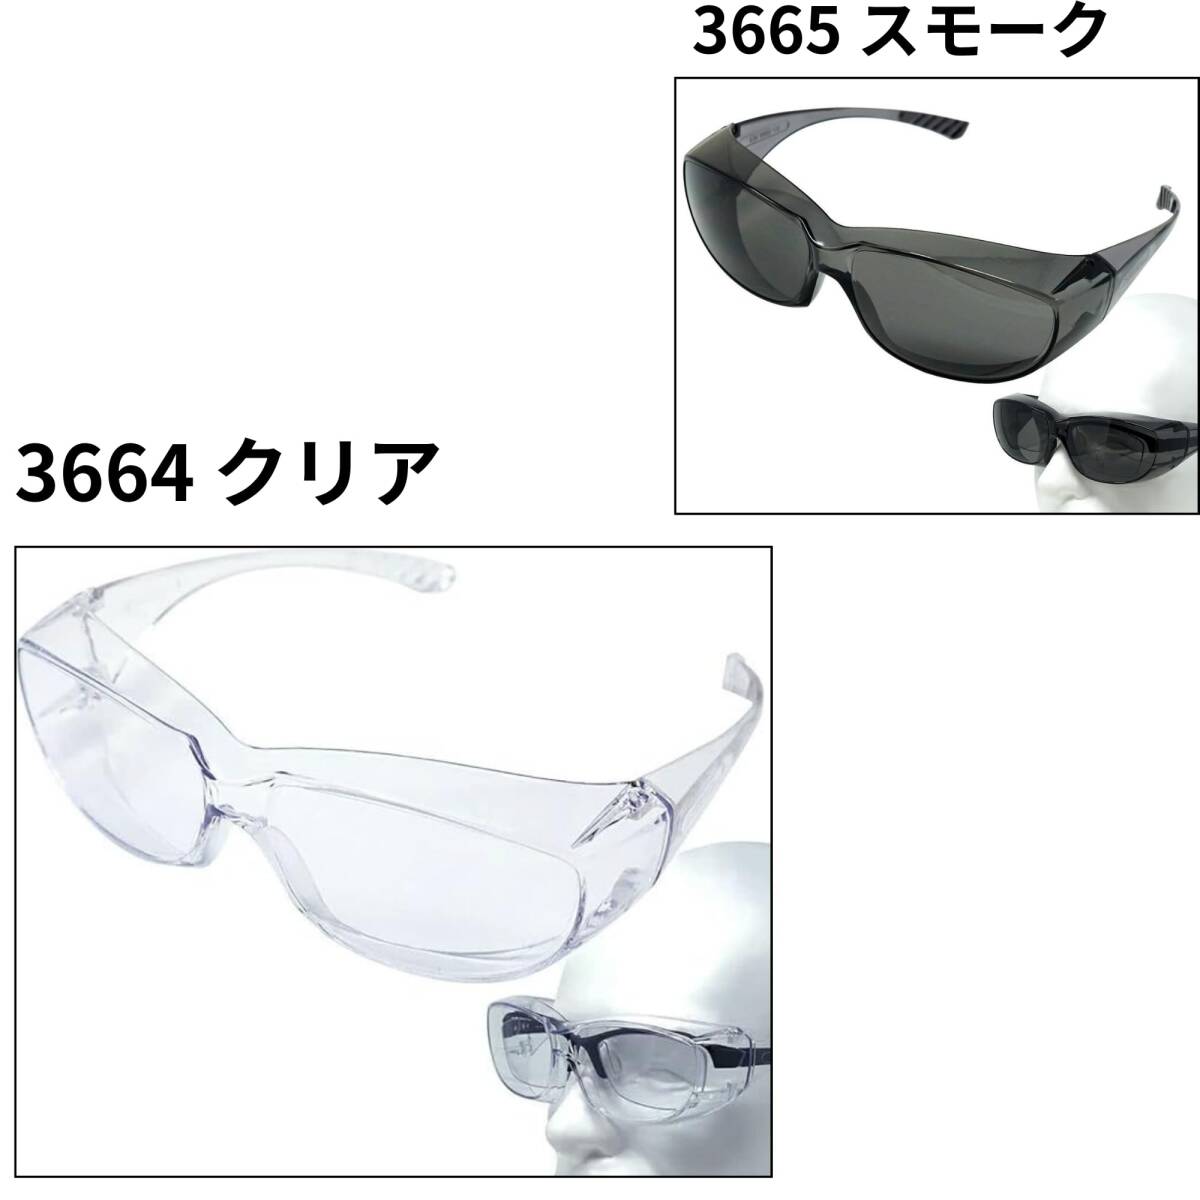 [POLARIS] glasses. on ..... goggle for hay fever cloudiness difficult protection glasses over glass type safety glass medical care for goggle 